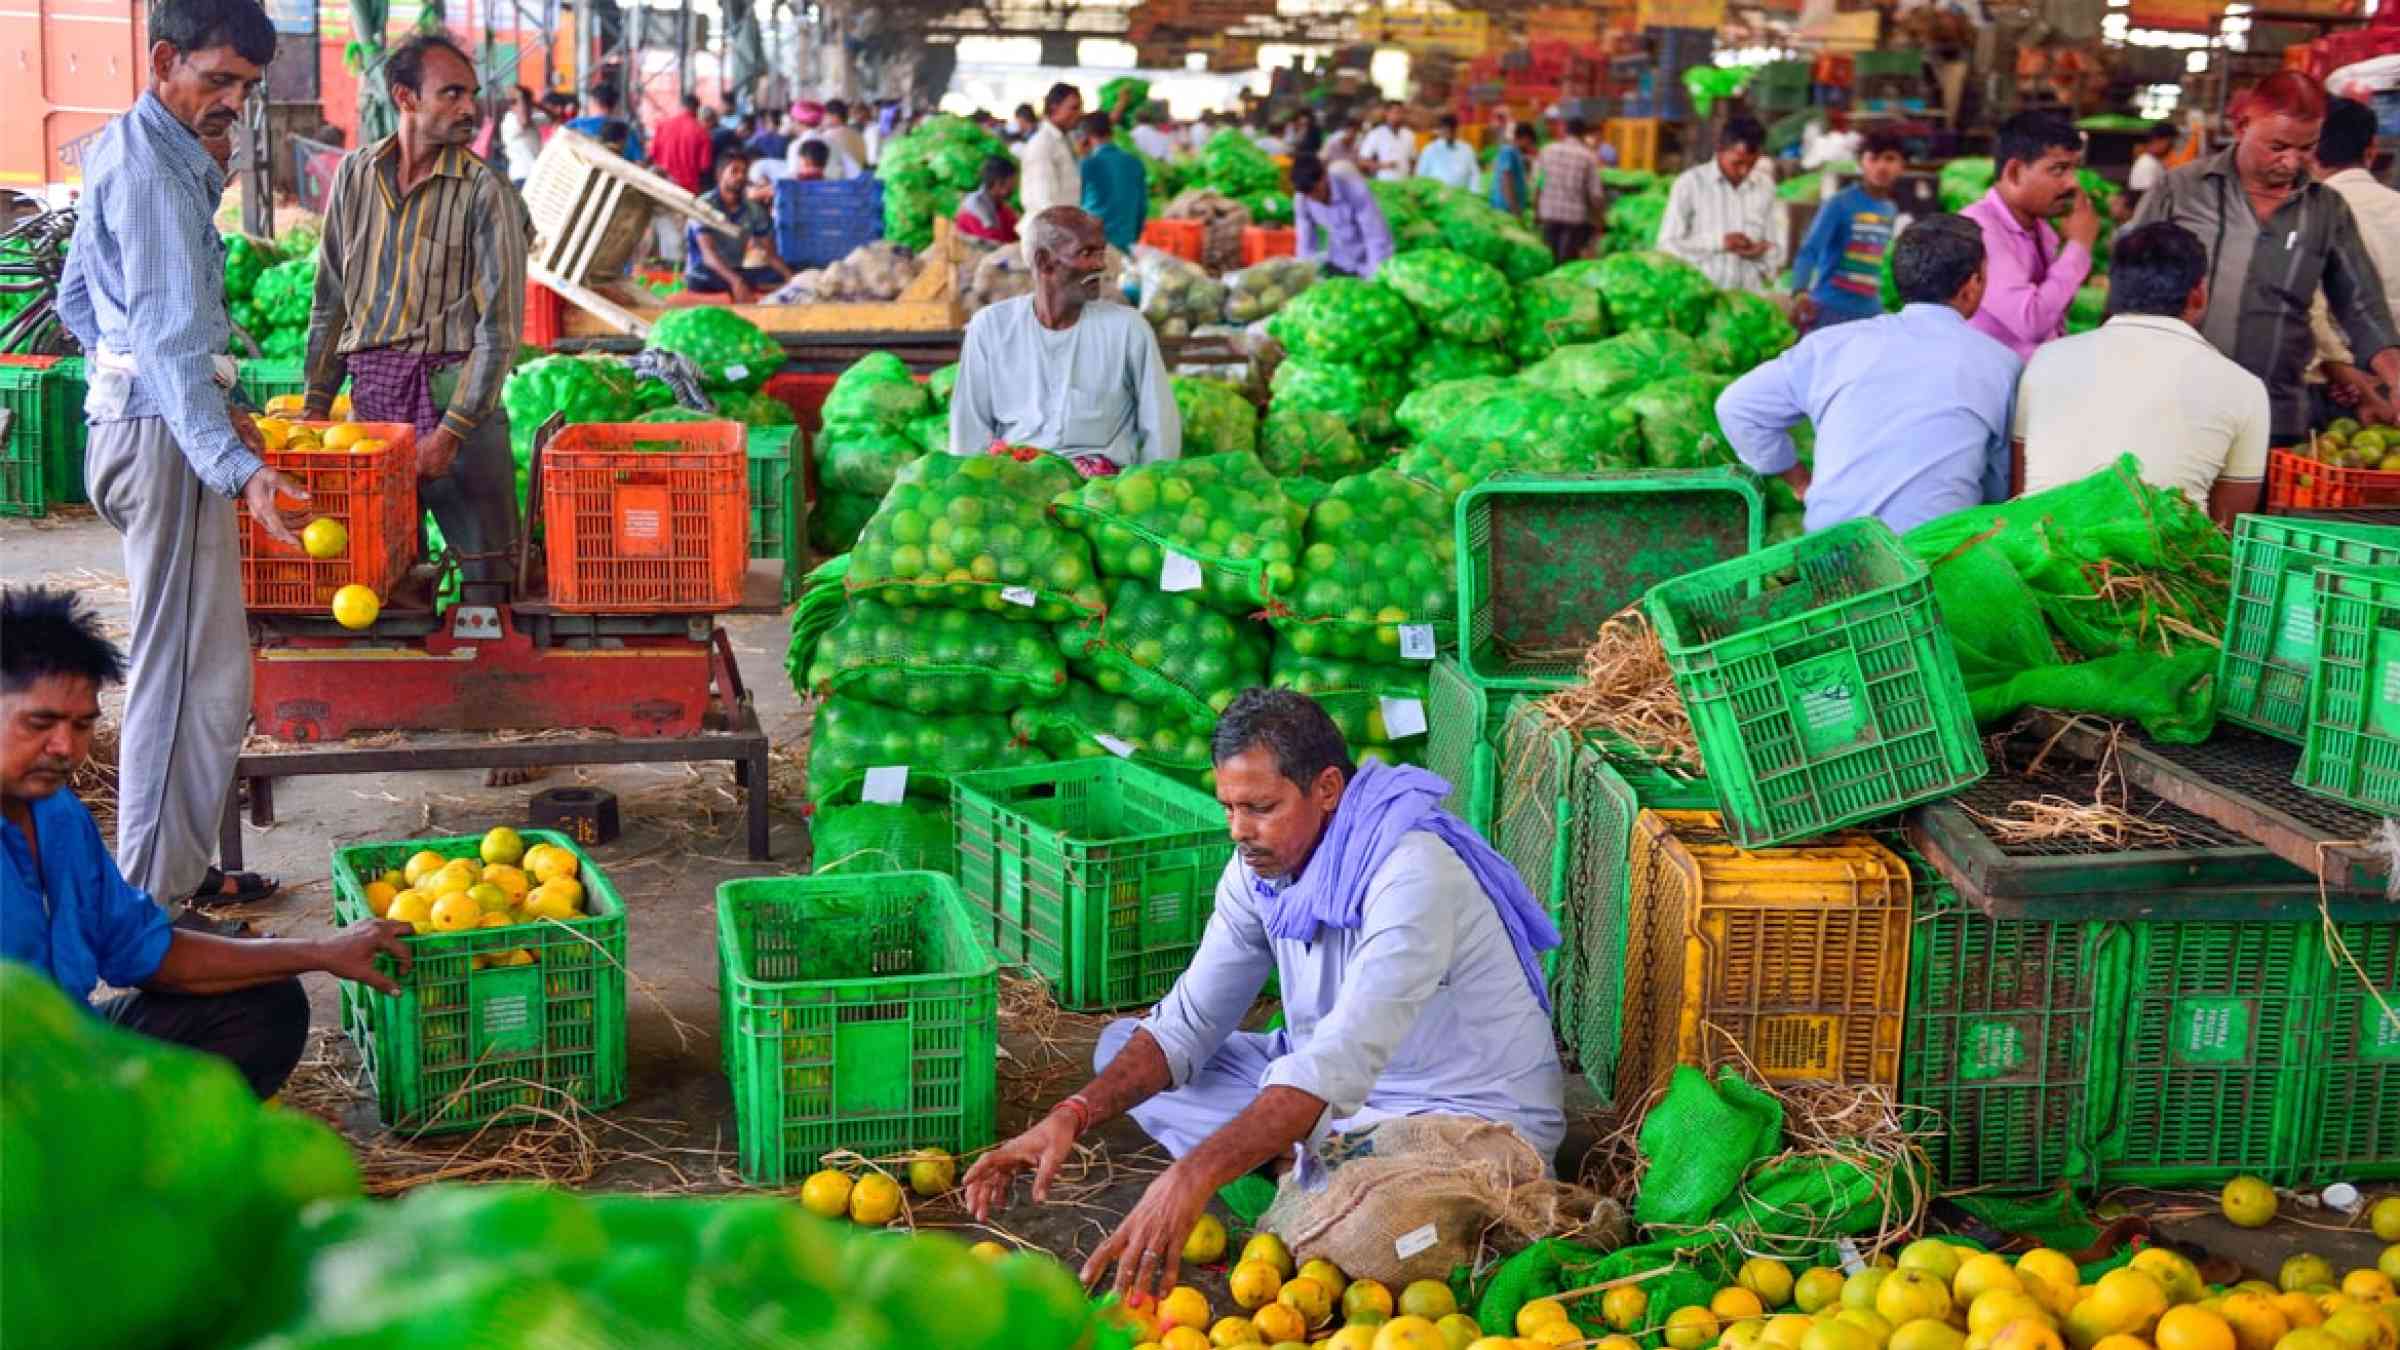 Workers packing citrus in New Delhi, India